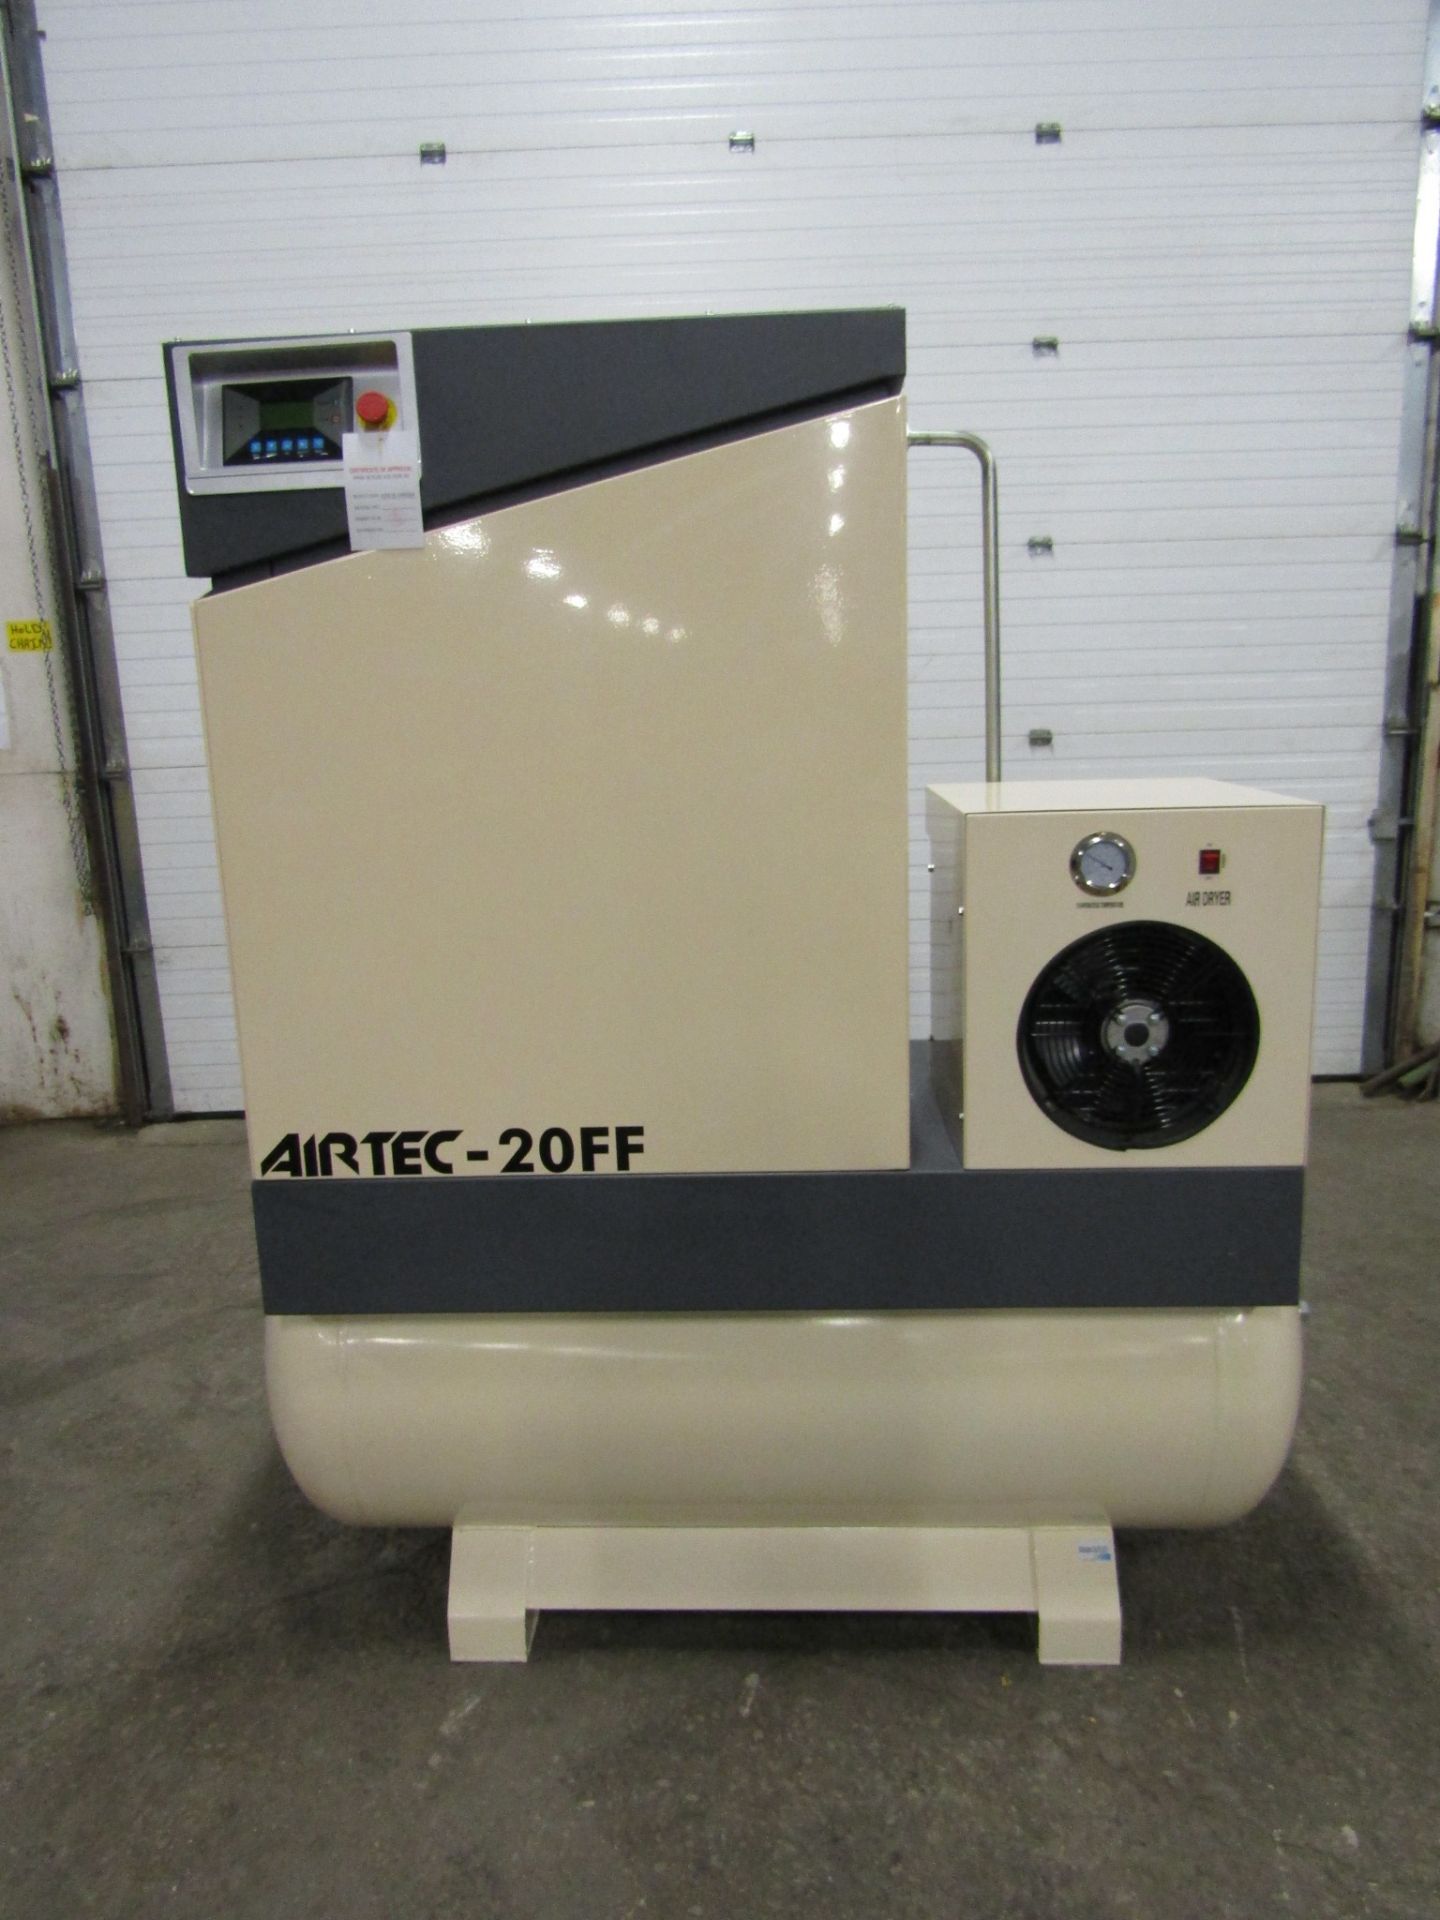 Airtec model 20FF - 20HP Air Compressor with built on DRYER - MINT UNUSED COMPRESSOR with 125 Gallon